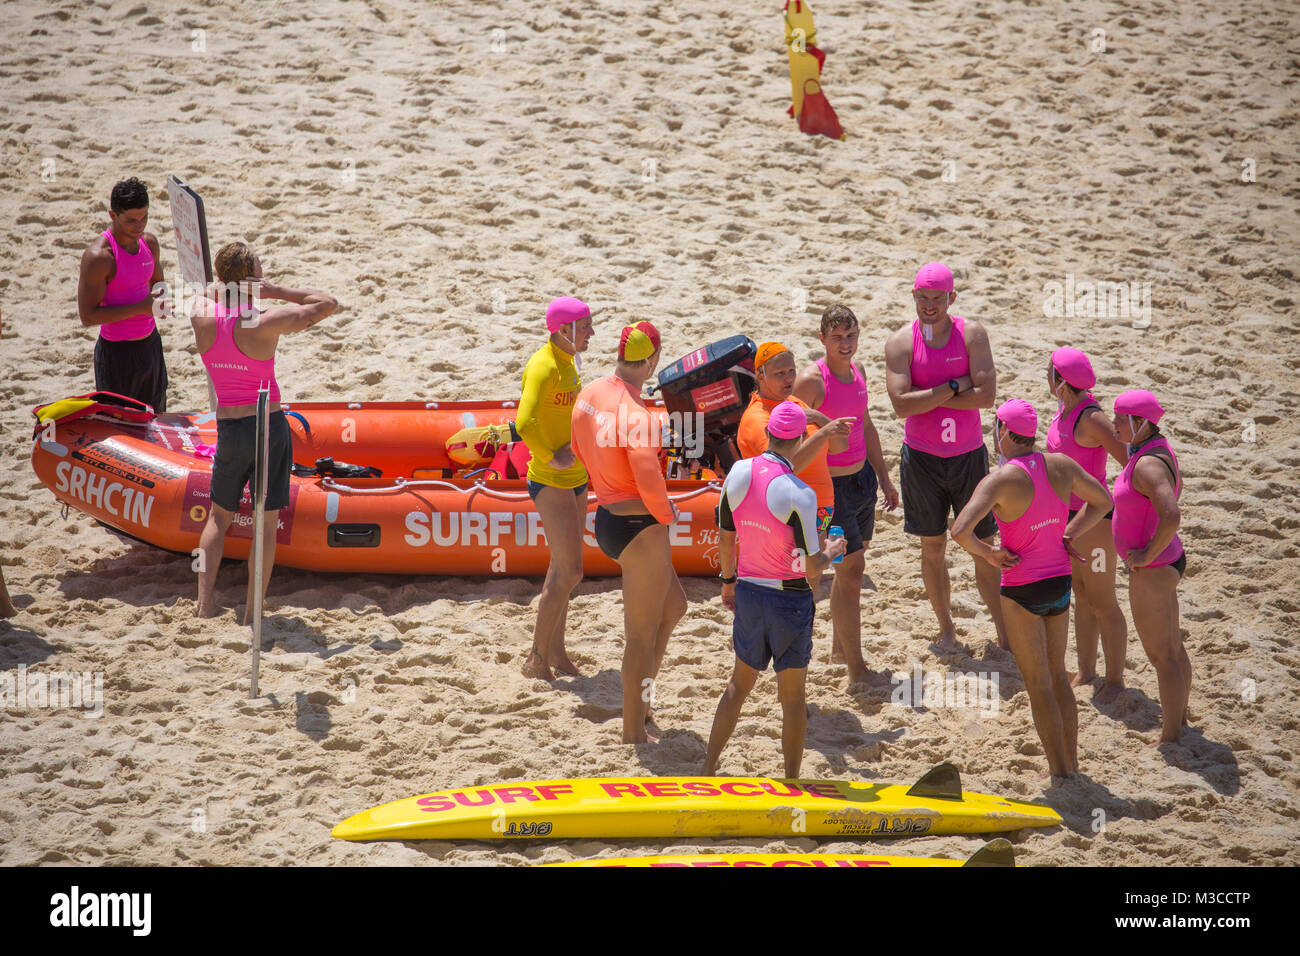 Volunteer surf rescue people on Tamarama beach in Sydney eastern suburbs, patrolling the beach and keeping people safe,NSW,Australia Stock Photo